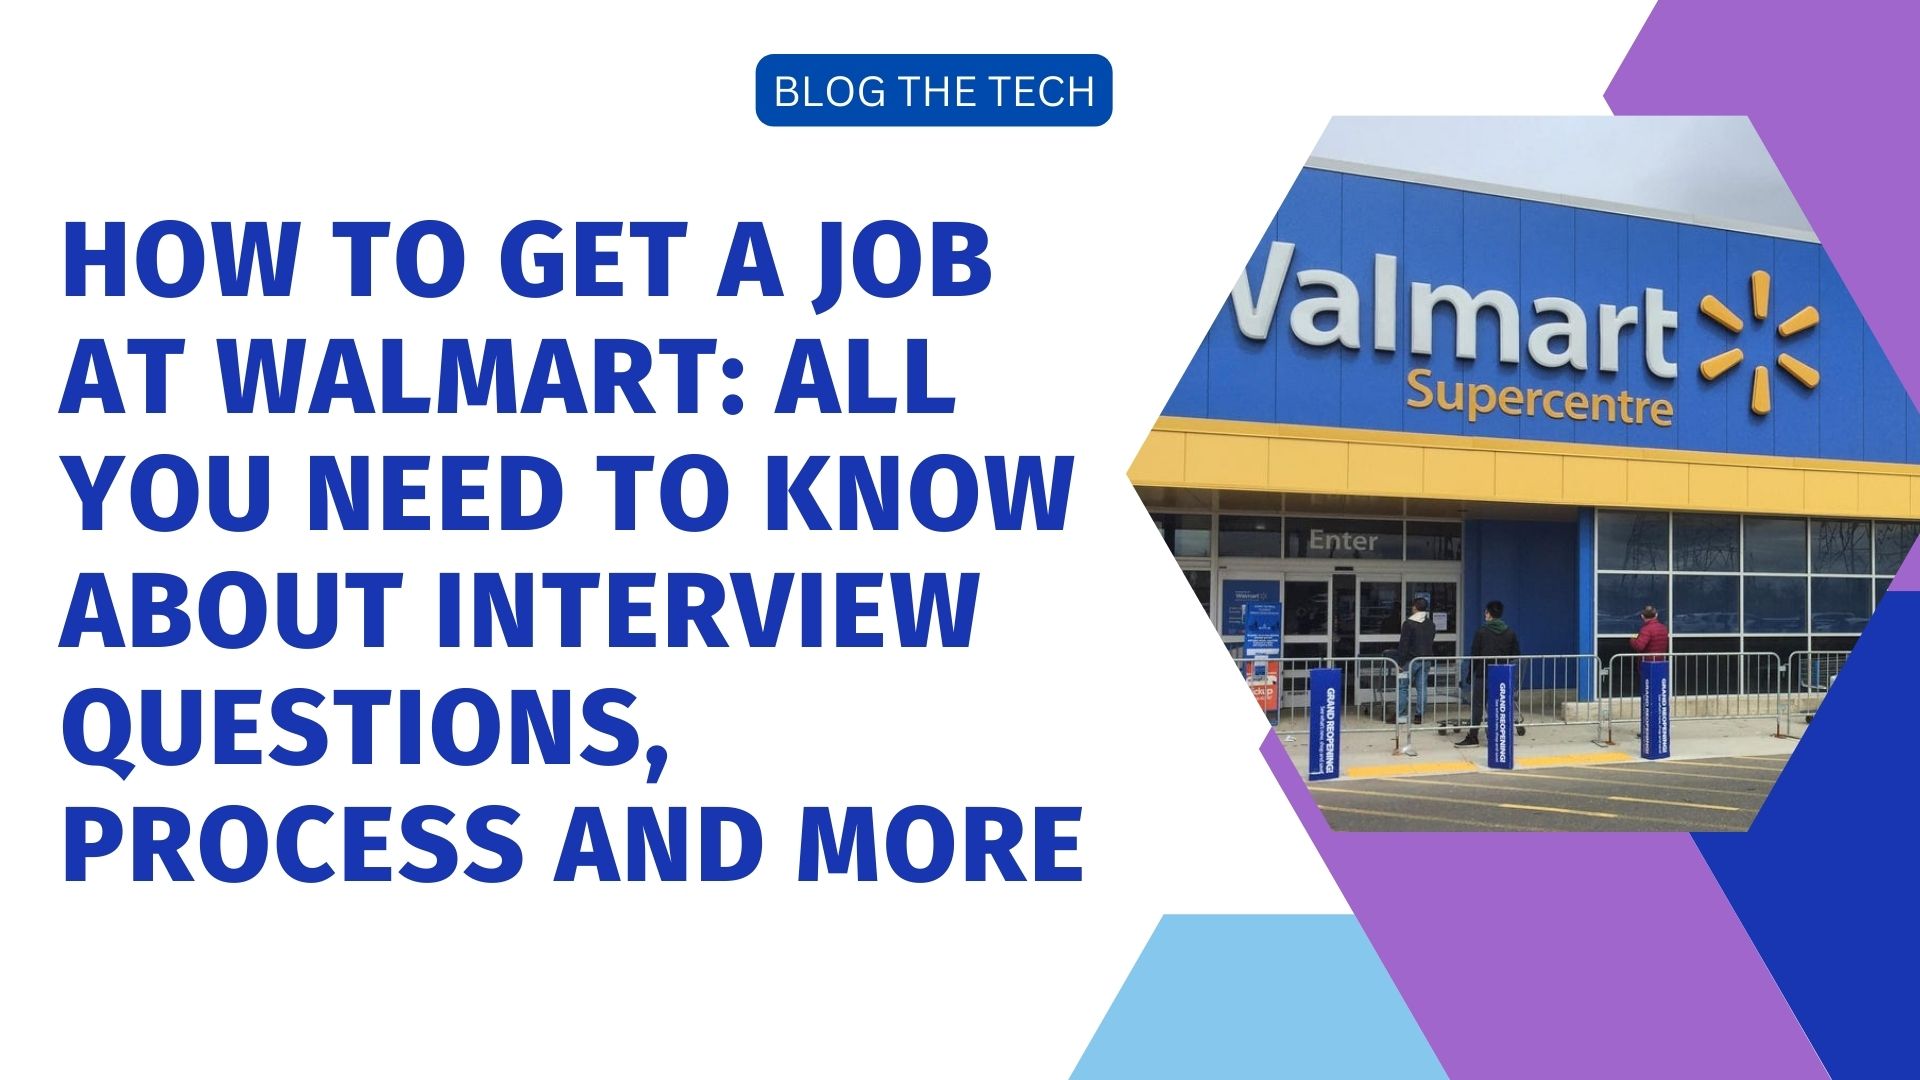 How to get a job at Walmart: All you need to know about Interview Questions, process and more